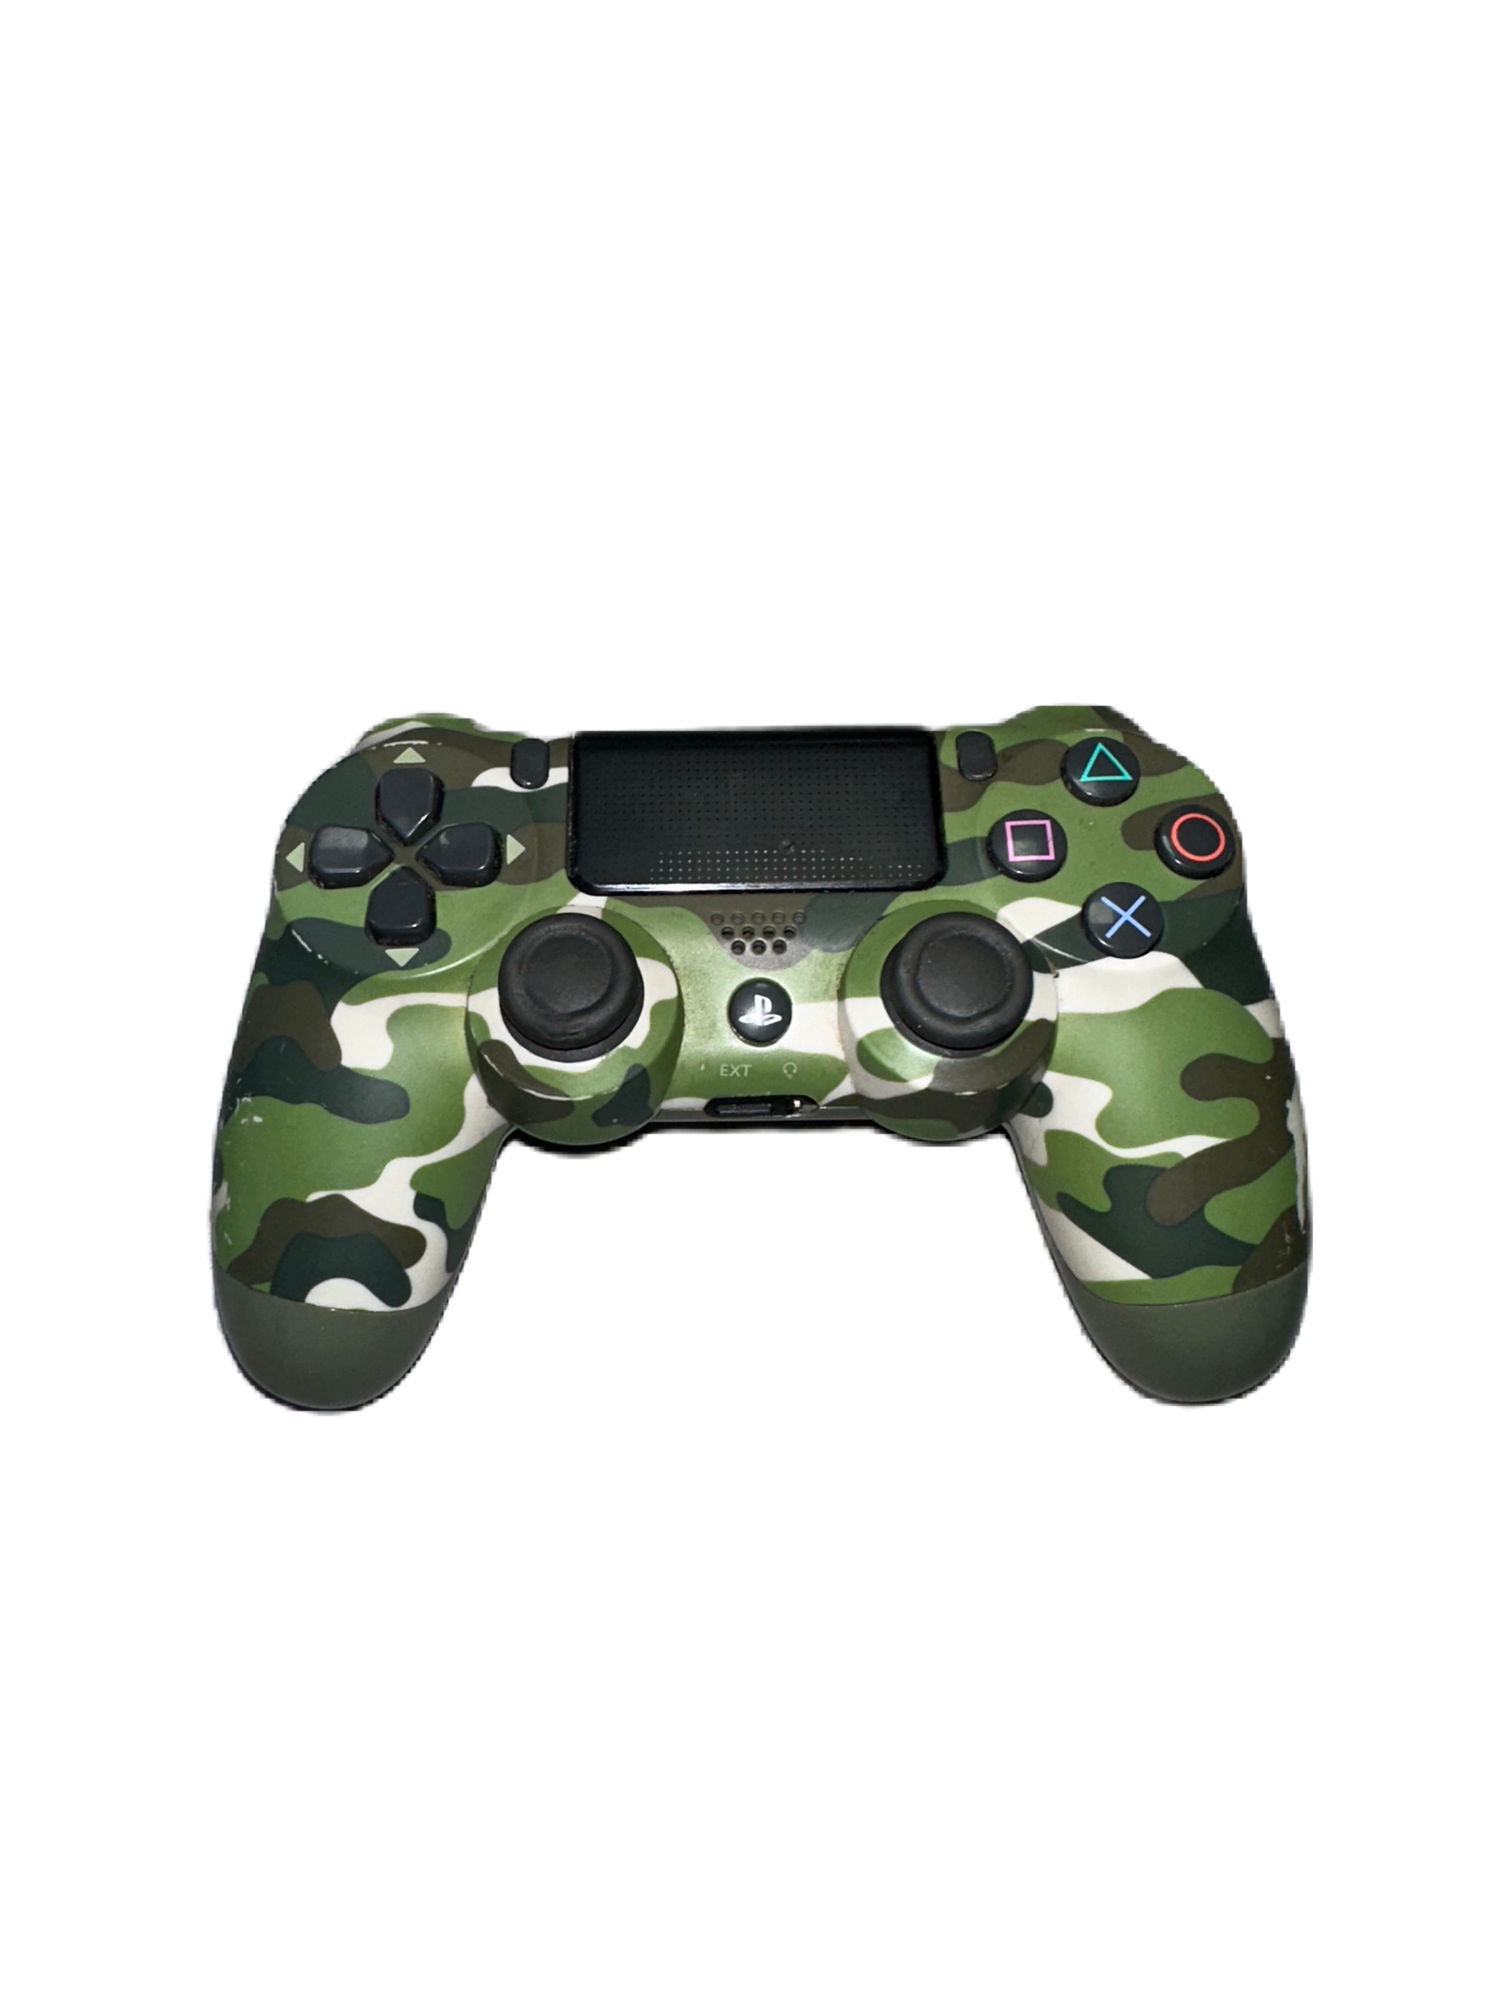 Playstation 4 Controller - CAMO - Faulty - Not Charging